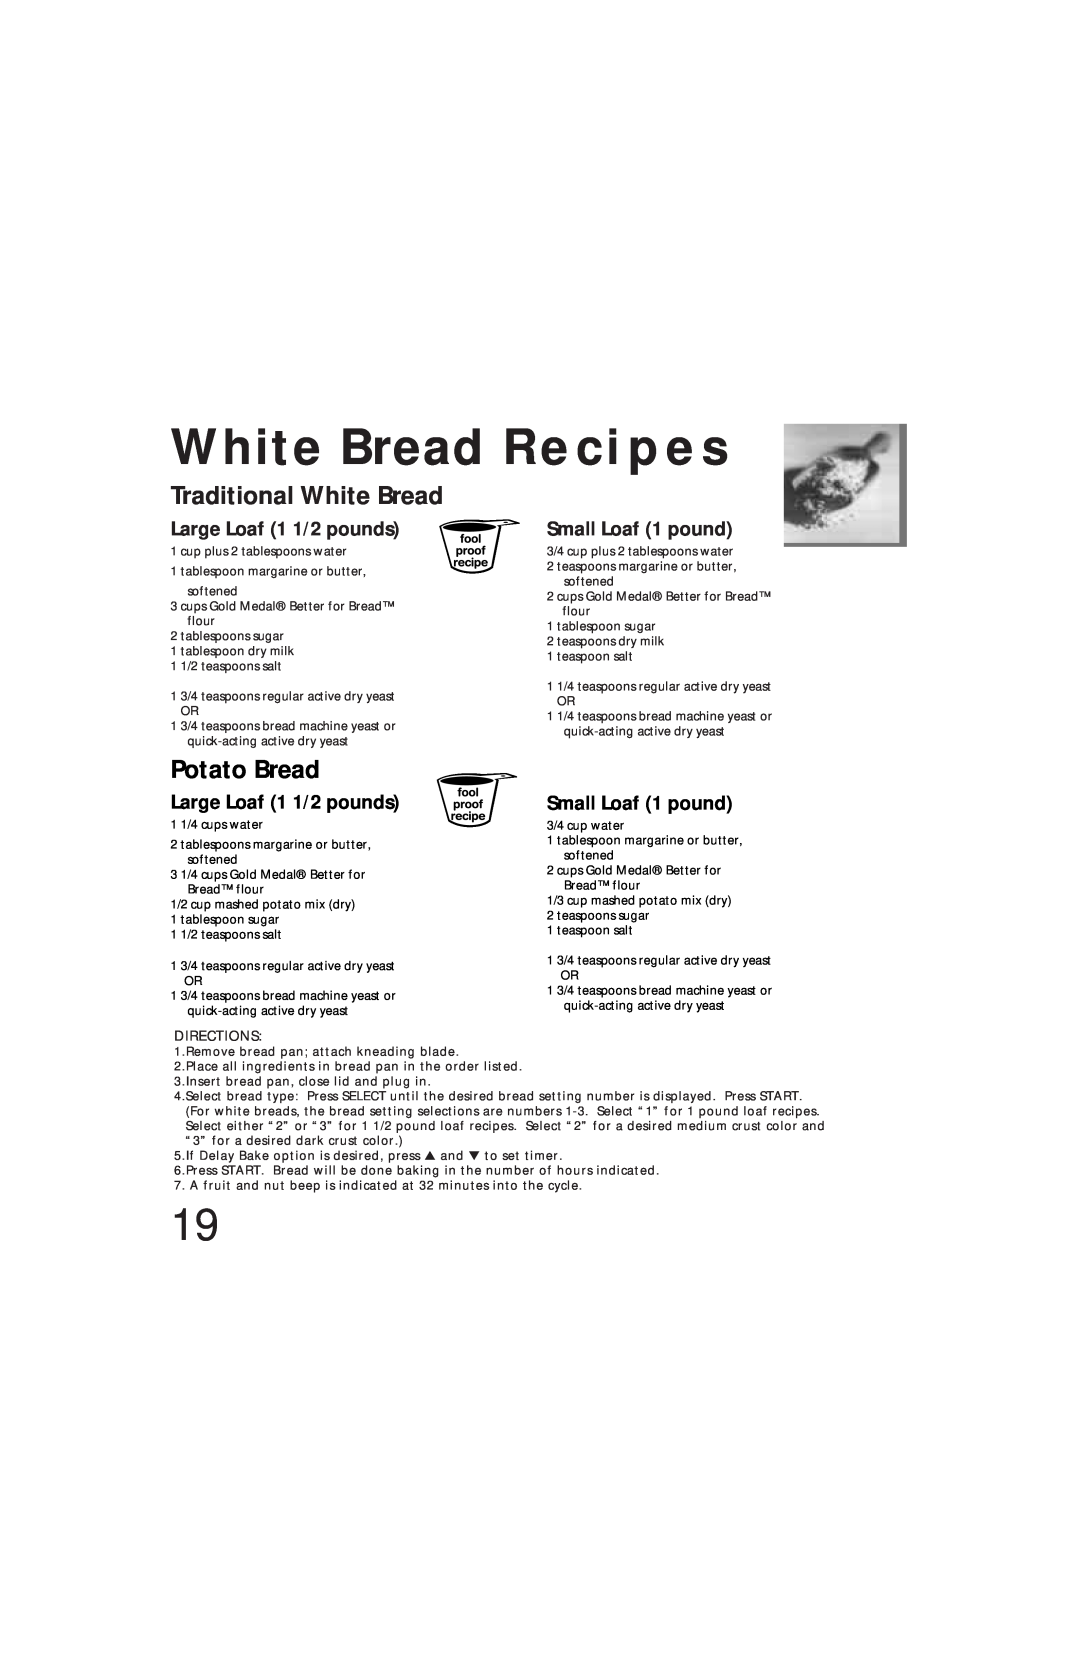 Oster Bread & Dough Maker manual White Bread R e c i p e s, Large Loaf 1 1/2 pounds, Small Loaf 1 pound 